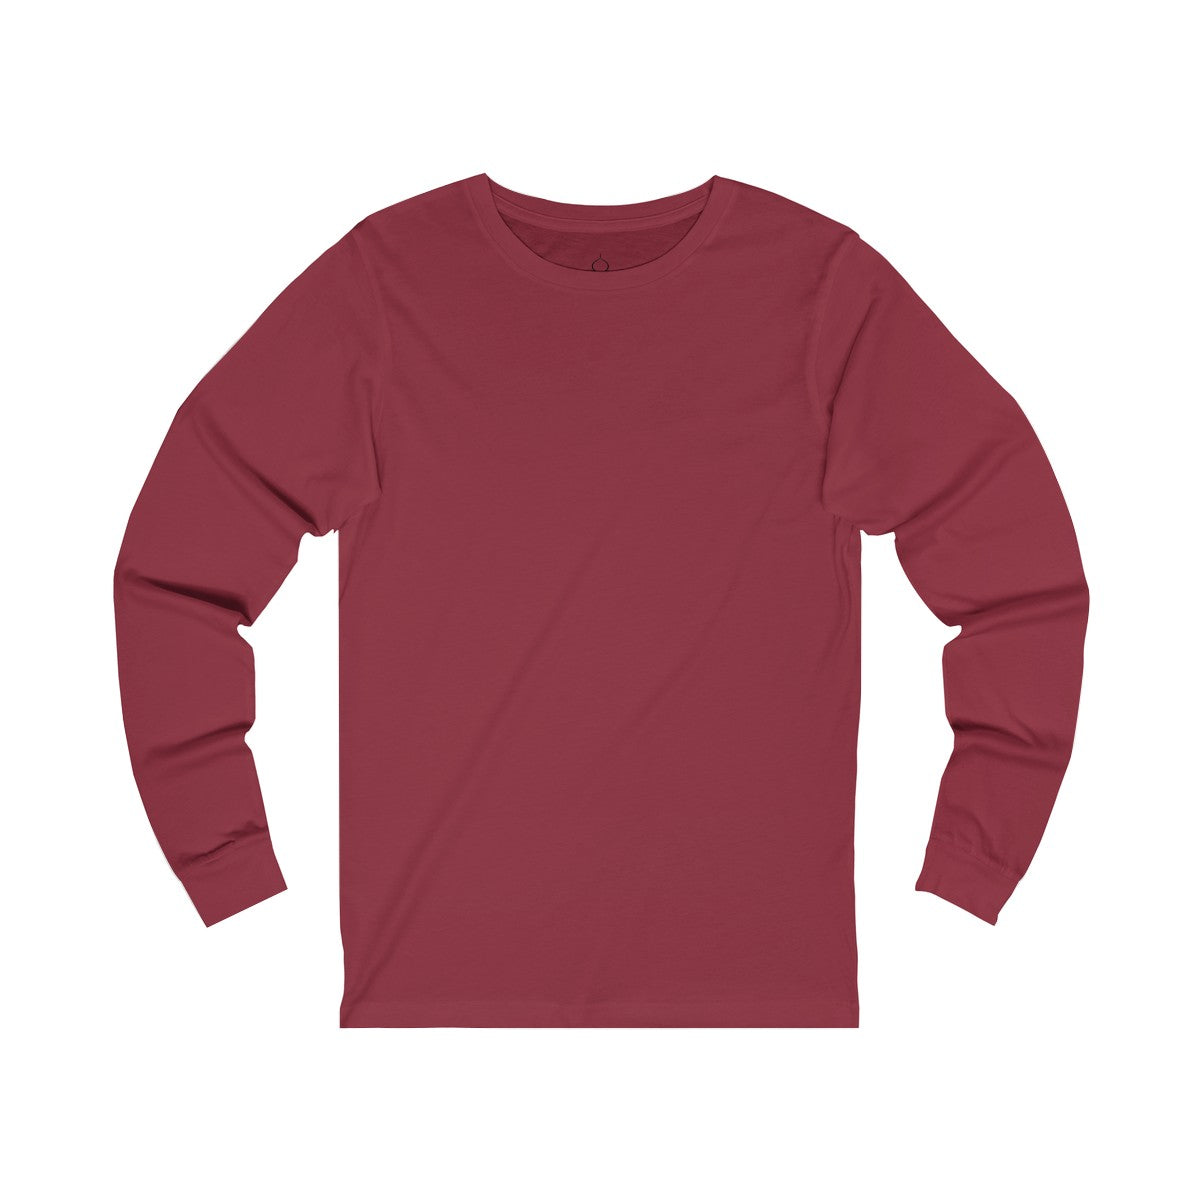 Love Is Always The Answer - Men's Jersey Long Sleeve Tee